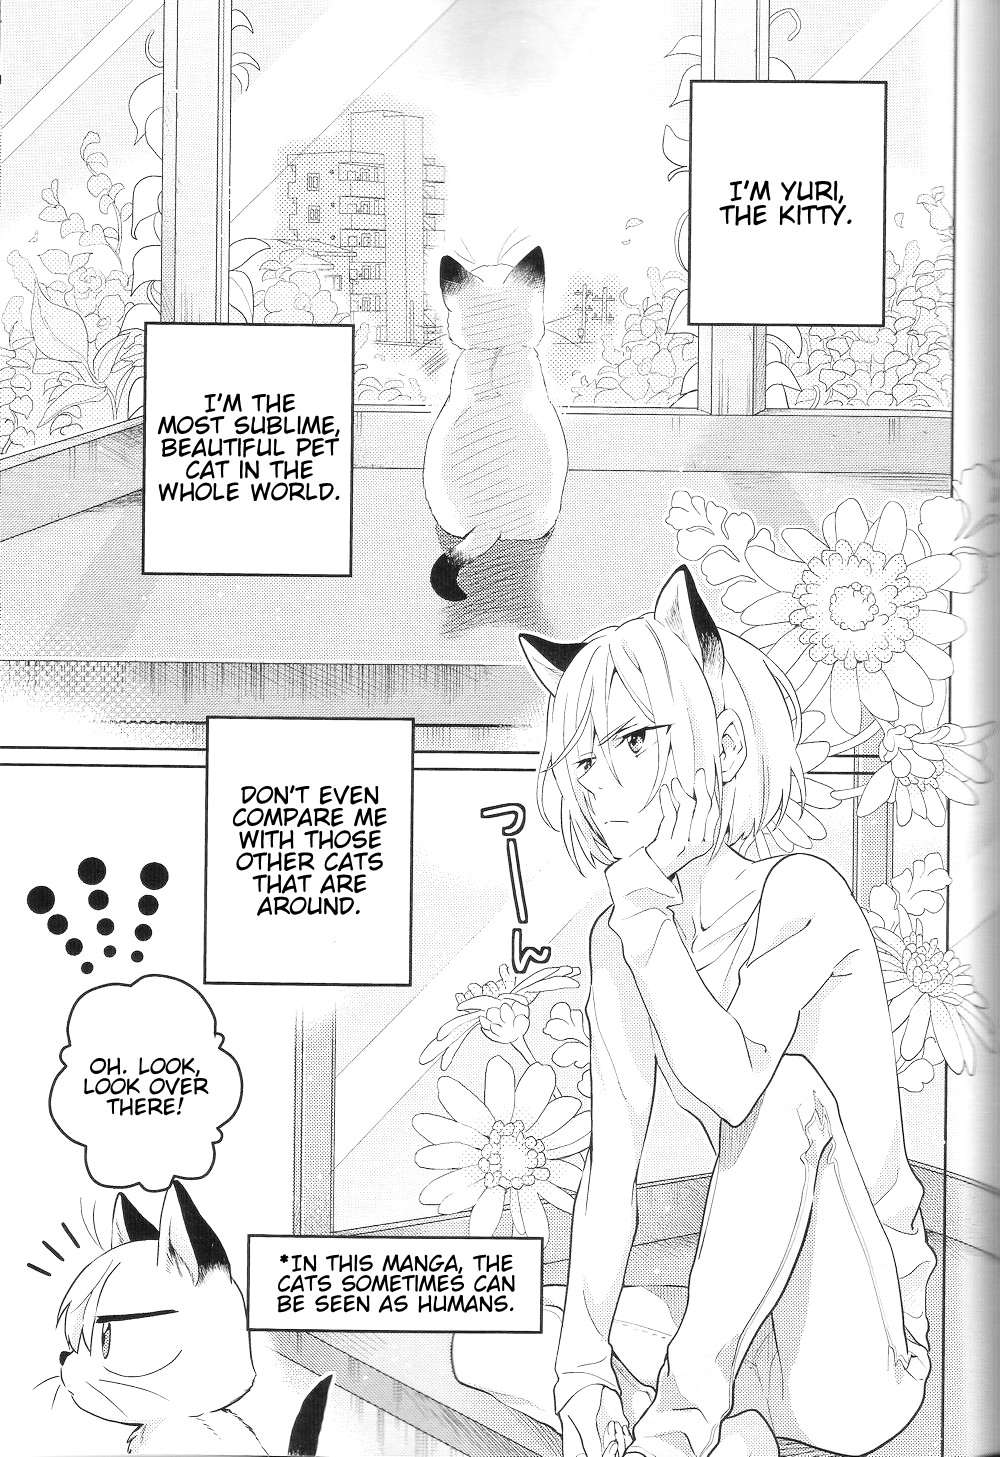 Yuri!!! on Ice - We Are Cats (Doujinshi) - chapter 1 - #4